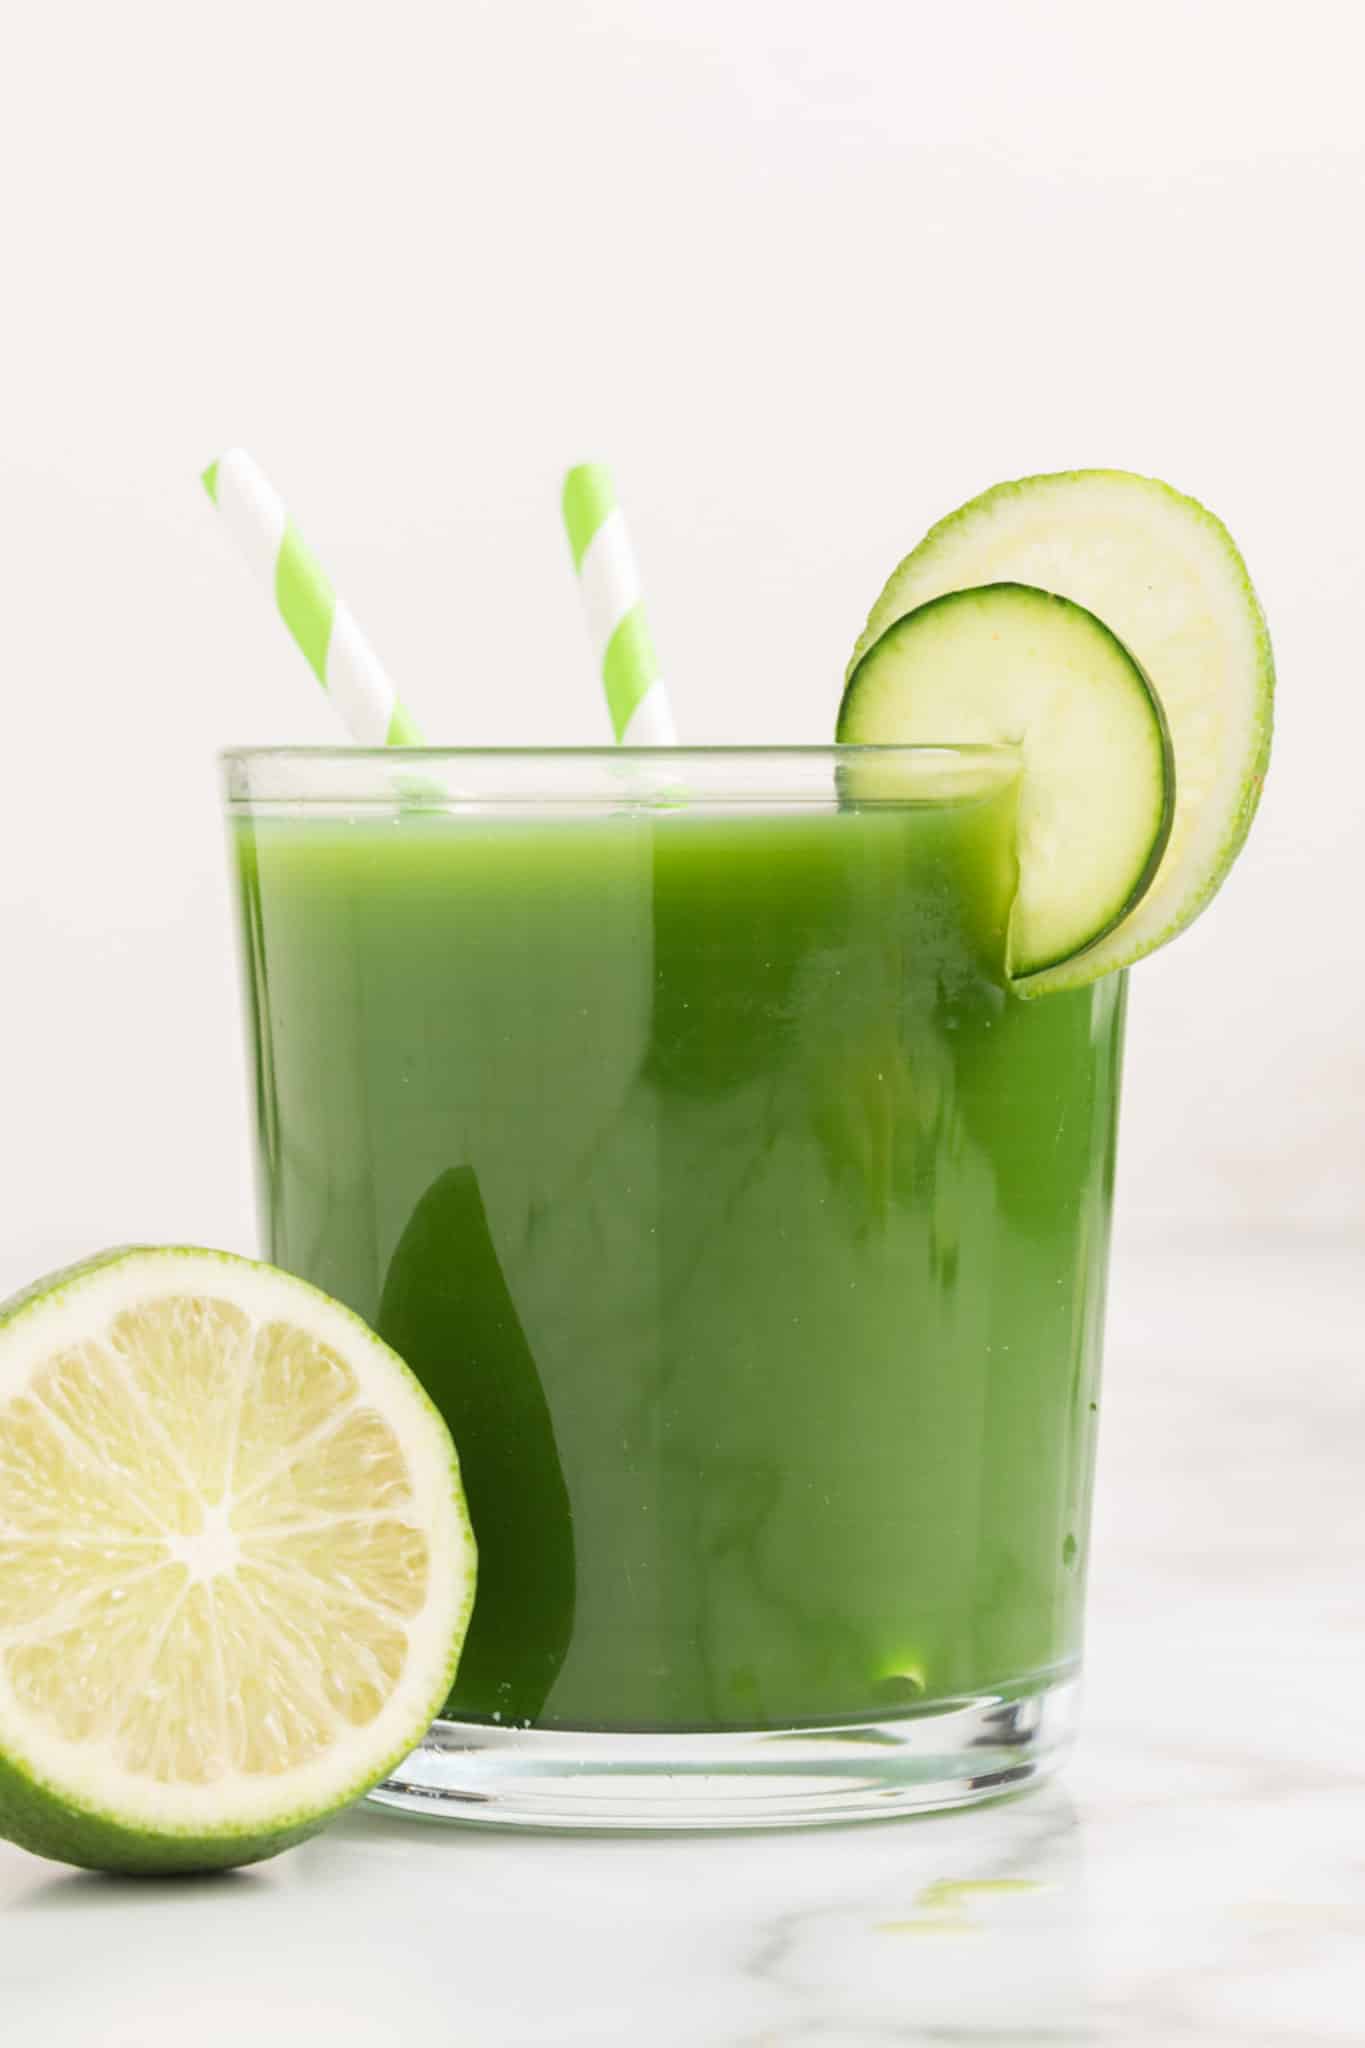 A glass of cucumber juice with lime wheels on the rim.